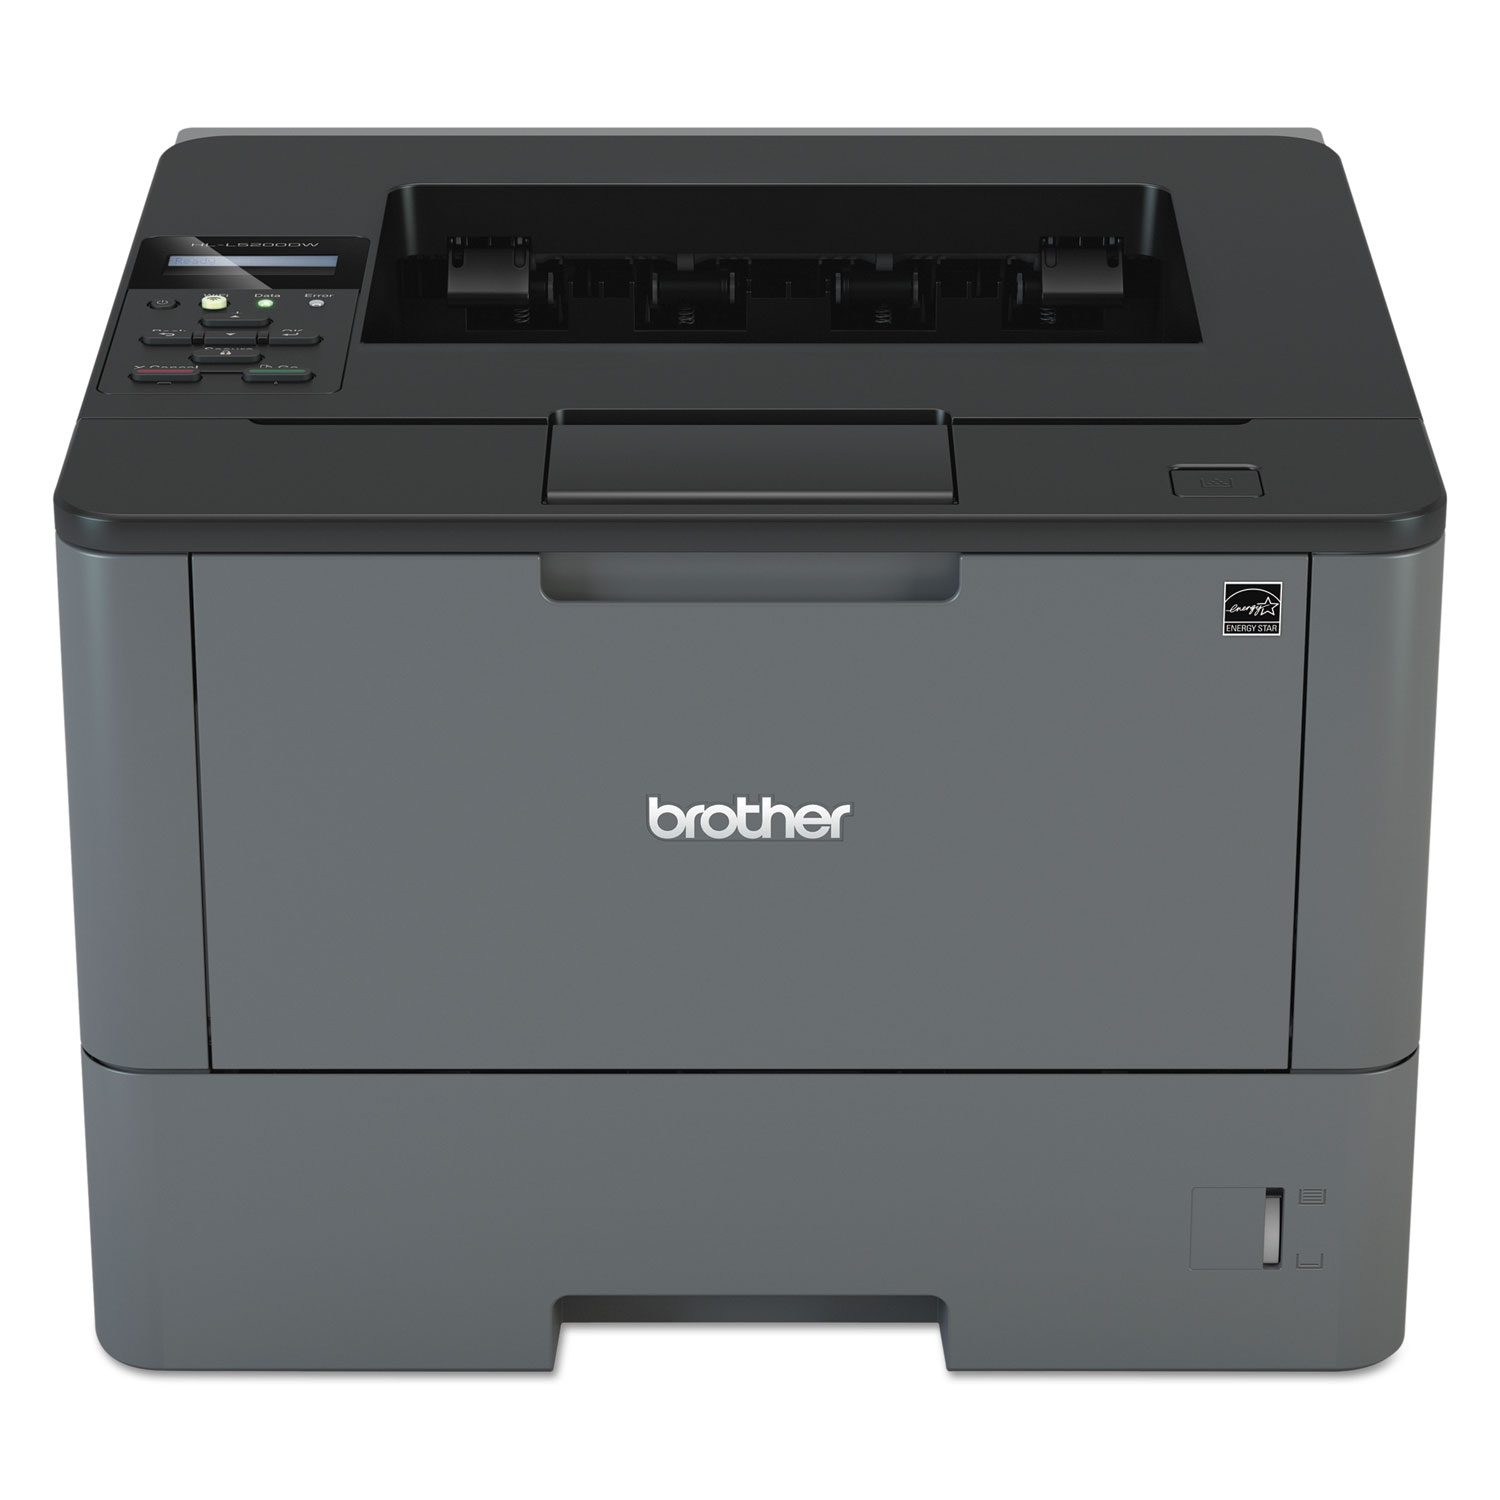  Brother HLL5200DW HLL5200DW Business Laser Printer with Wireless Networking and Duplex Printing (BRTHLL5200DW) 